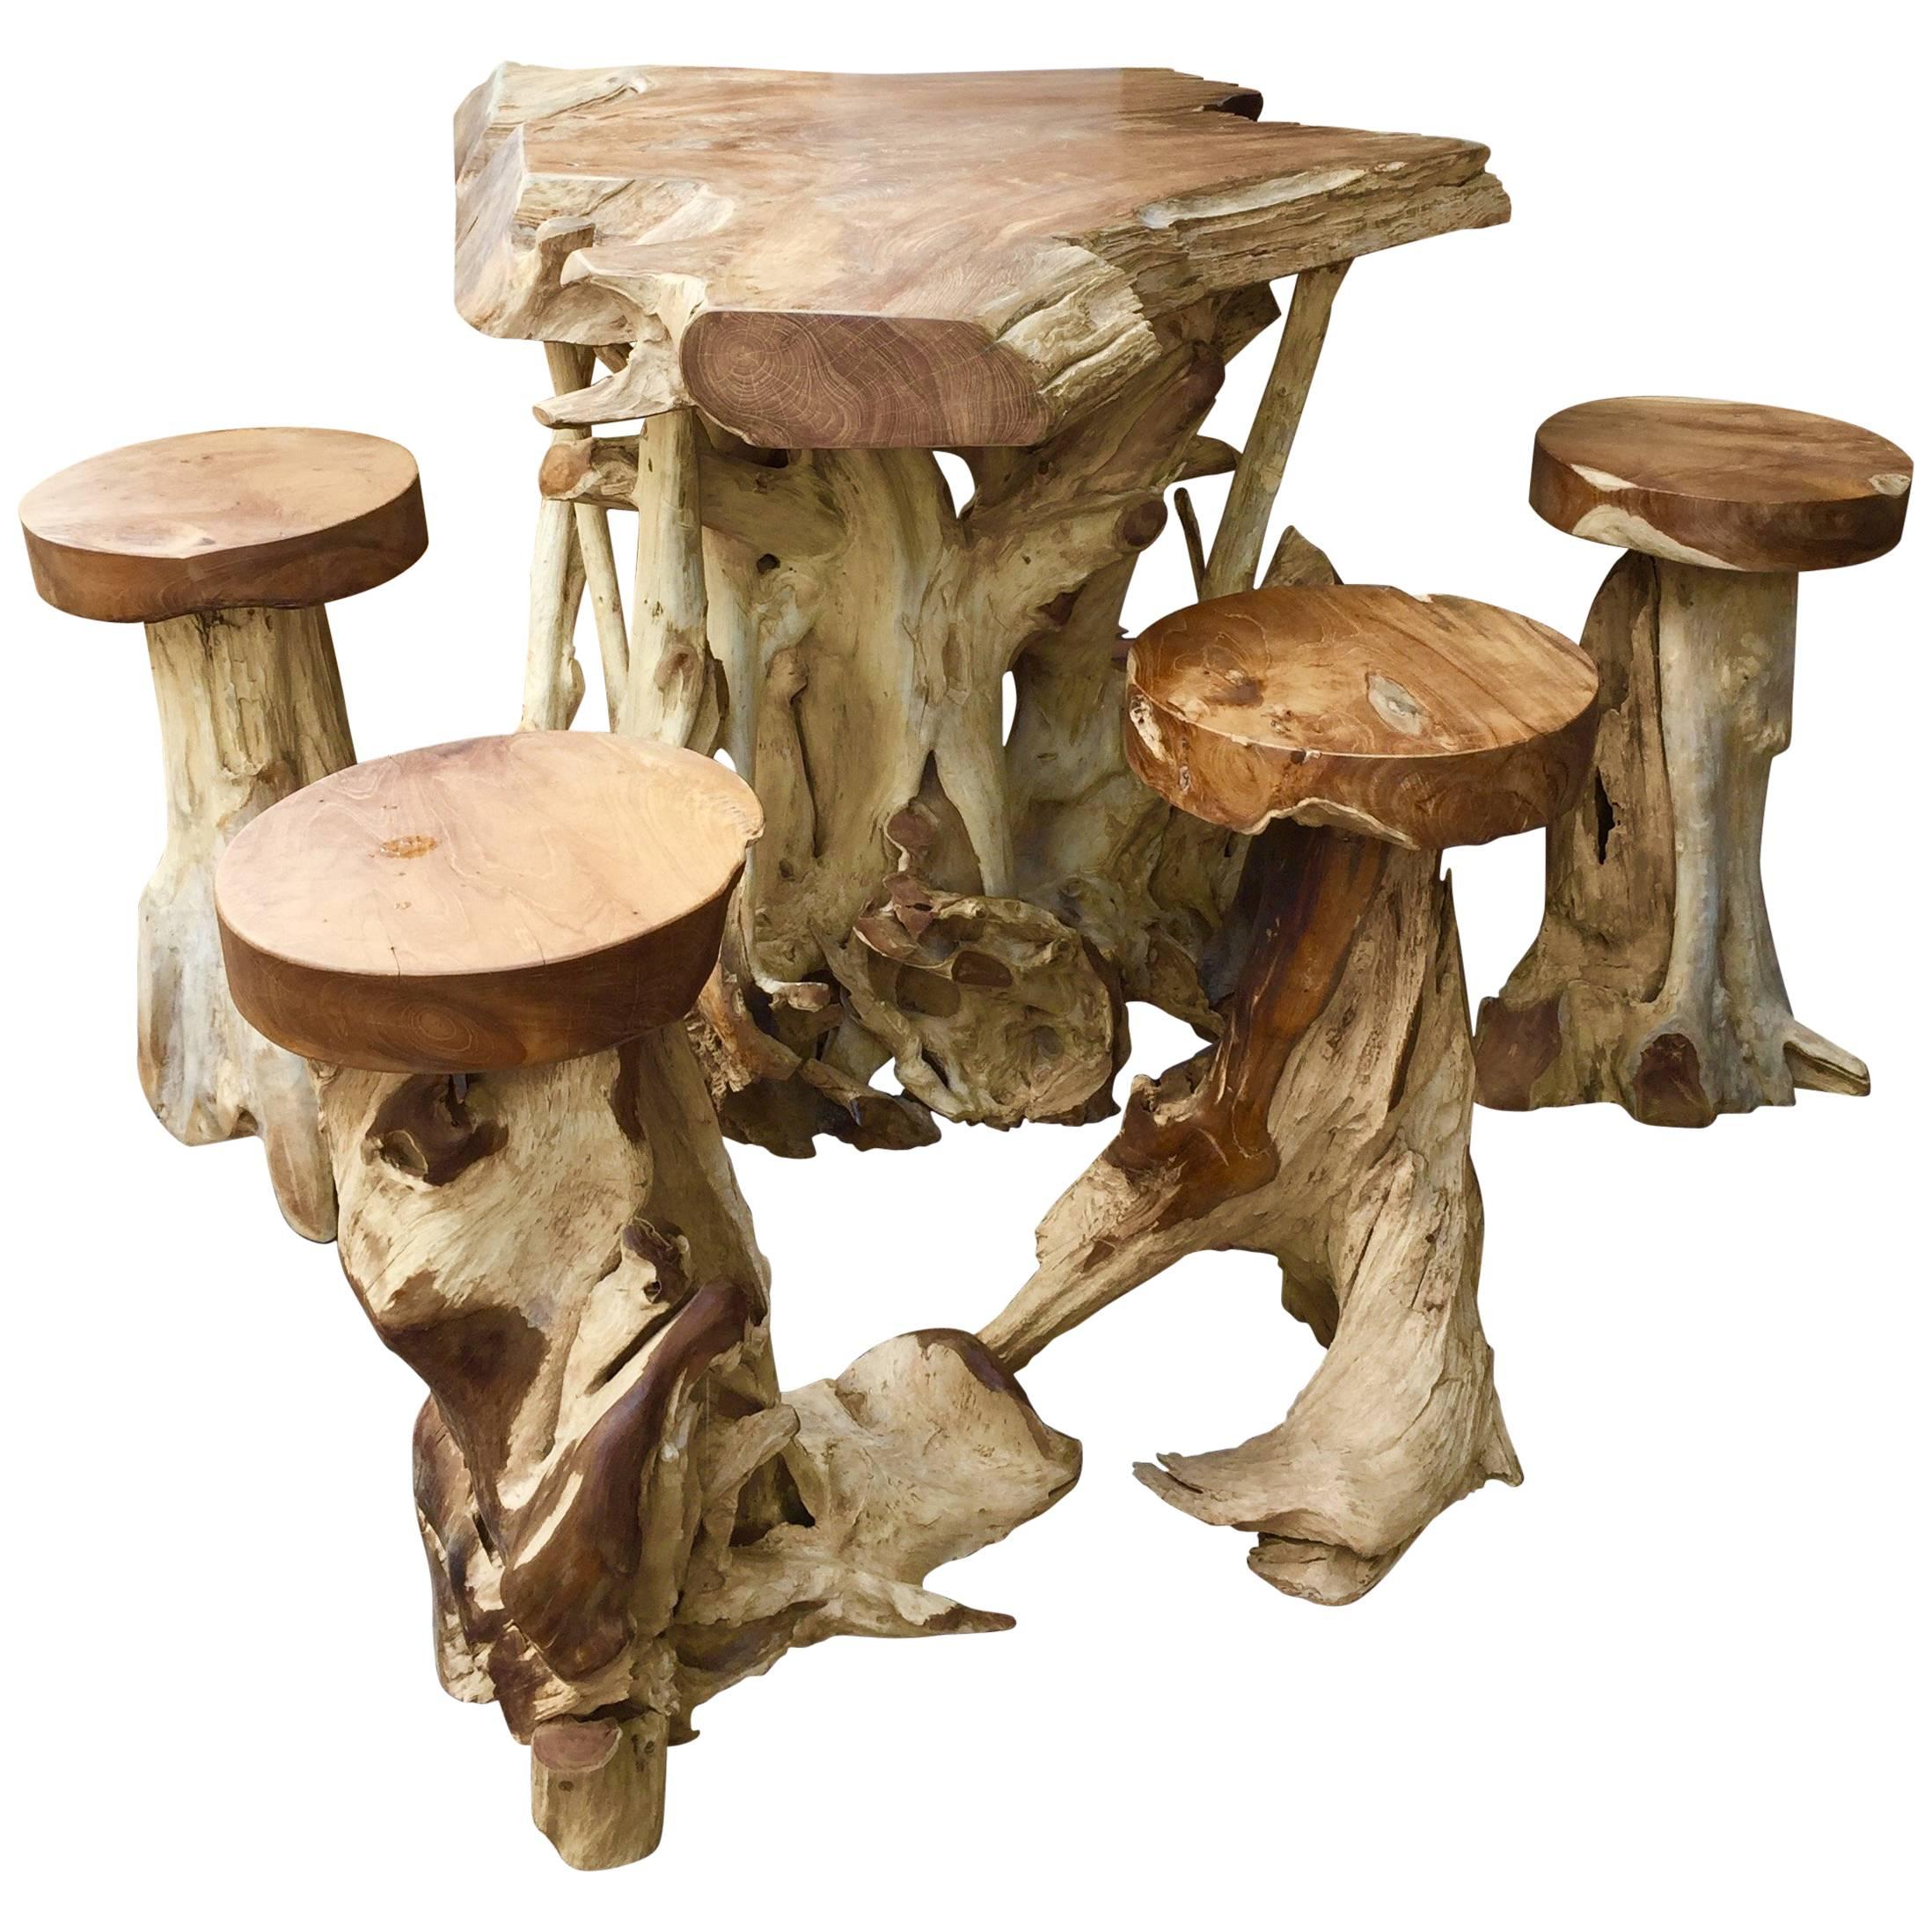 Very Unique High Table and Stools Made from Ancient Teak Root